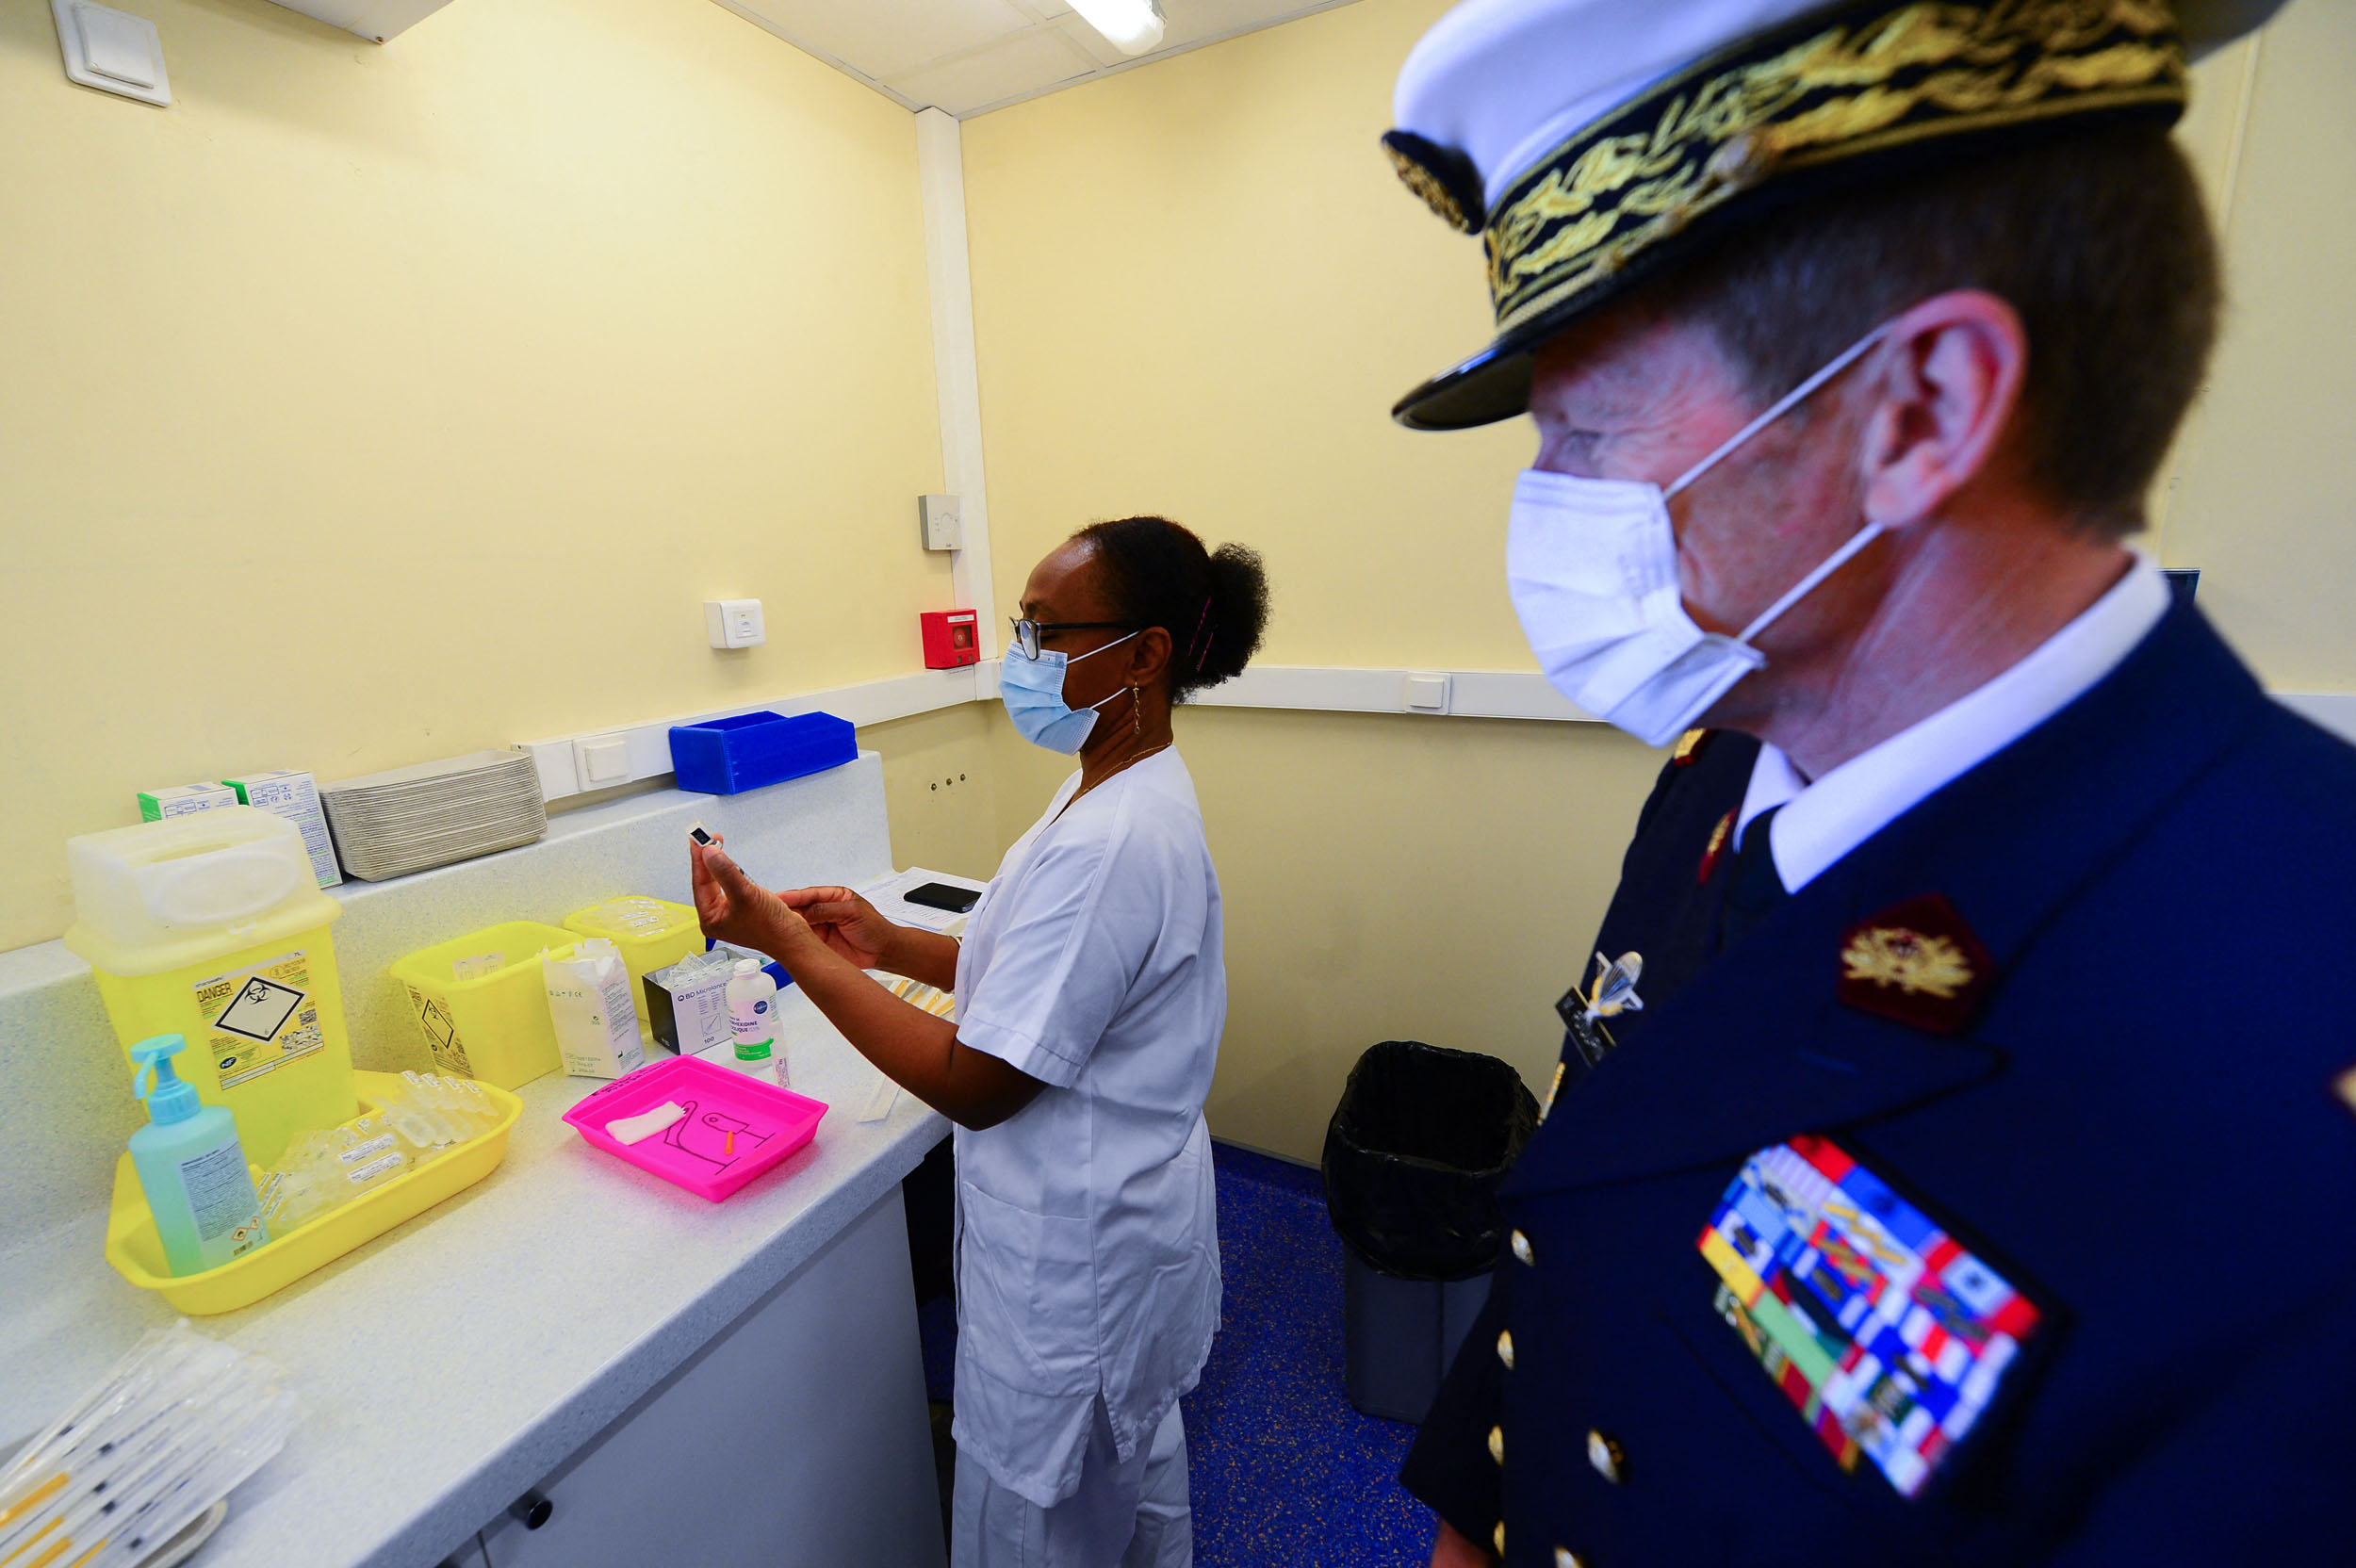 A nurse prepares a serynge with a dose of the Pfizer-BioNTech vaccine against the coronavirus at the Robert Picque military hospital (HIA) in Villenave-d'Ornon, southwestern France, on April 6, 2021, during a vaccination campaign to fight the COVID-19 pandemic. (Photo by MEHDI FEDOUACH / AFP)